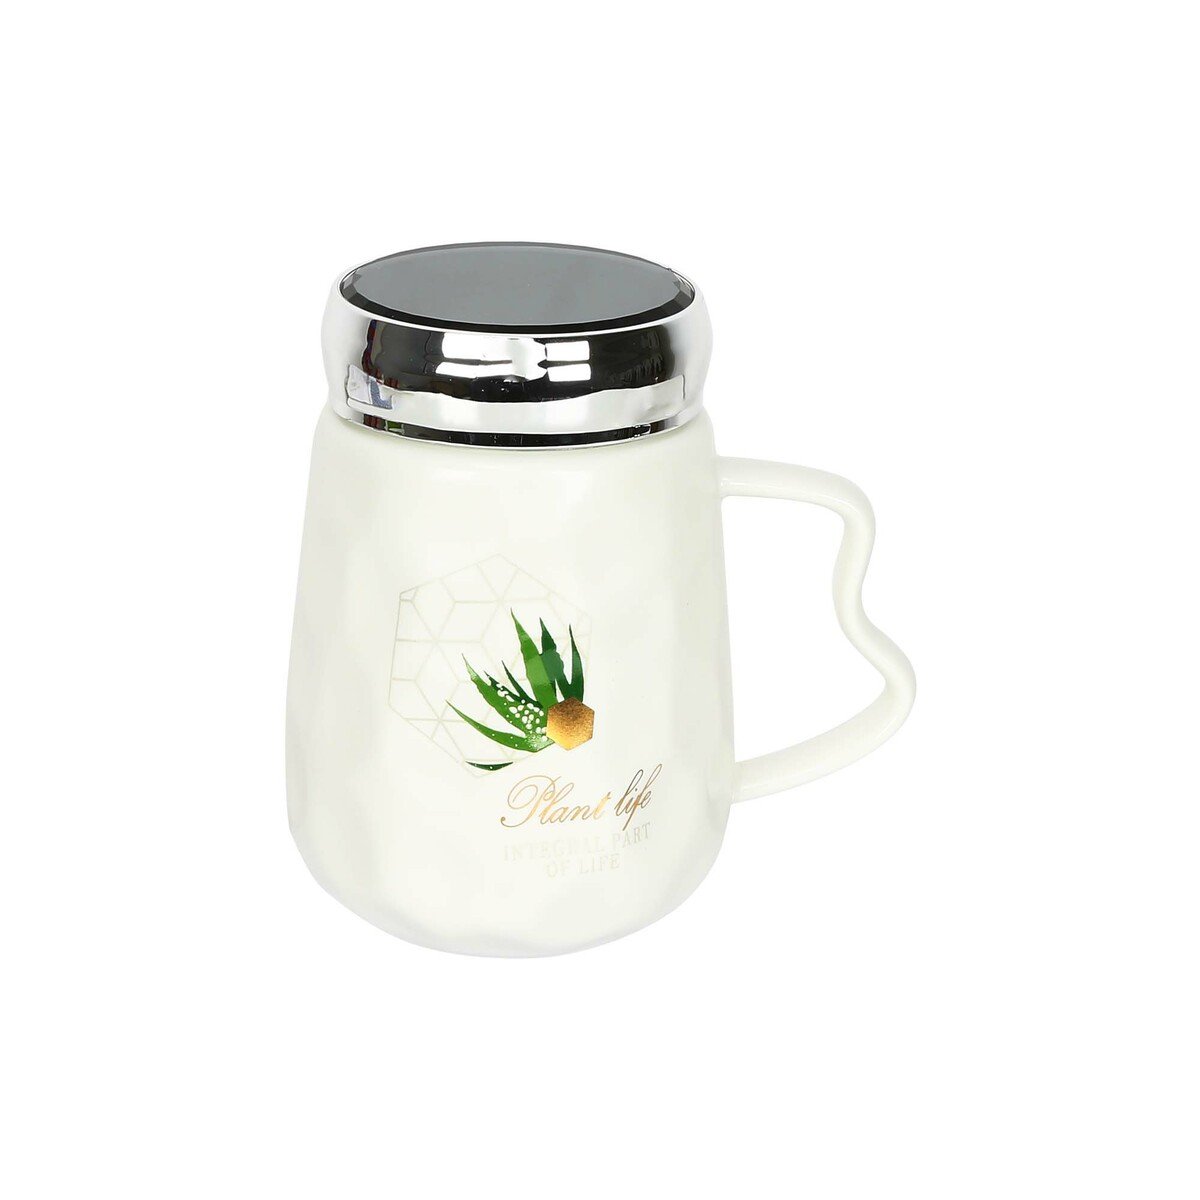 Mountain Ceramic Mug With Lid 500ml A285-8 Assorted Designs